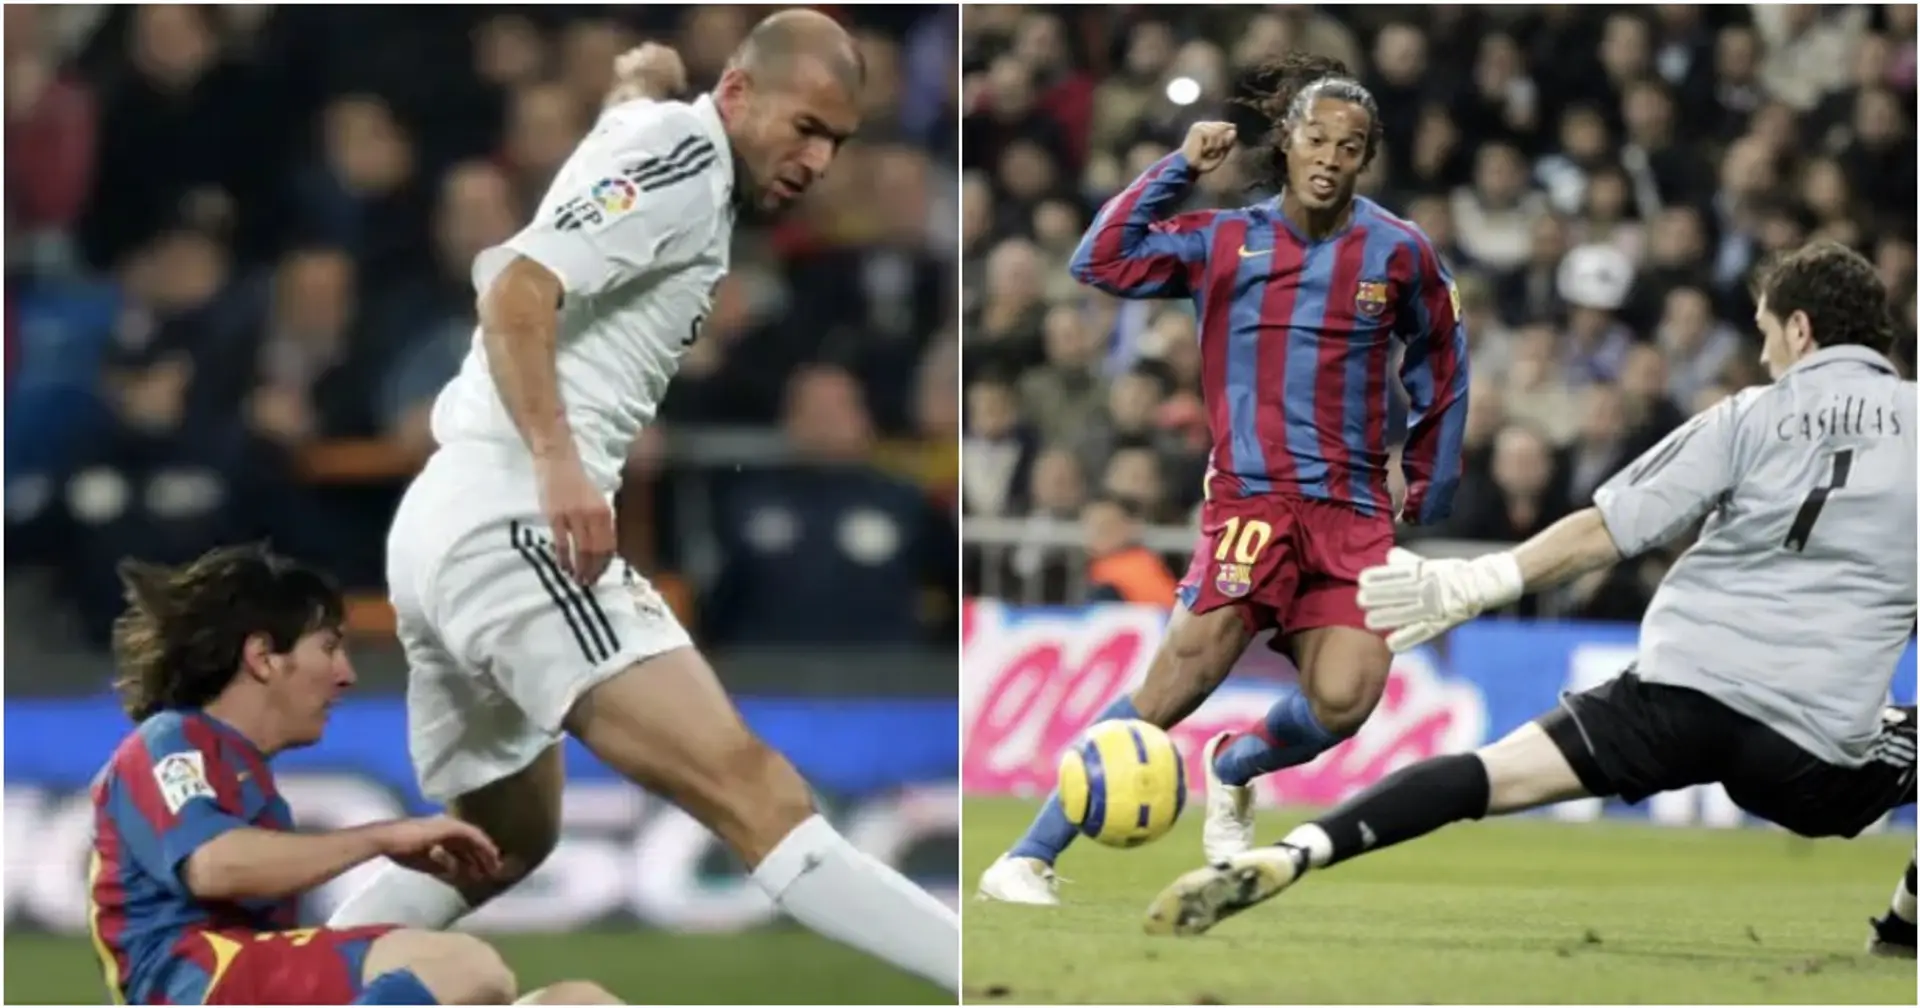 Only time Zidane and Messi met on the pitch — Ronaldinho was unstoppable that day